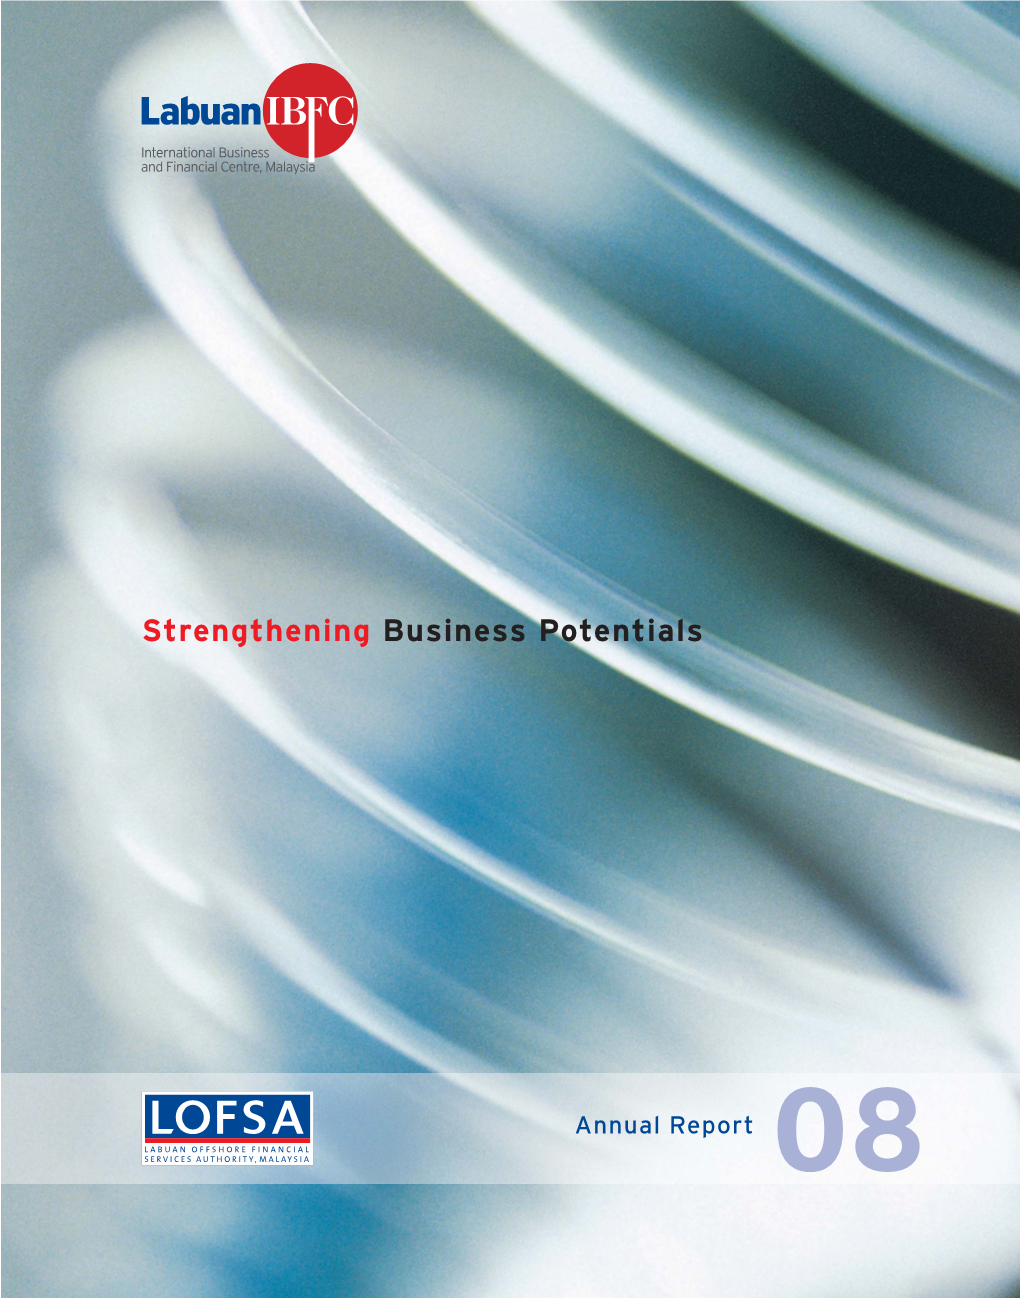 Labuan Offshore Financial Services Authority Annual Report 2008